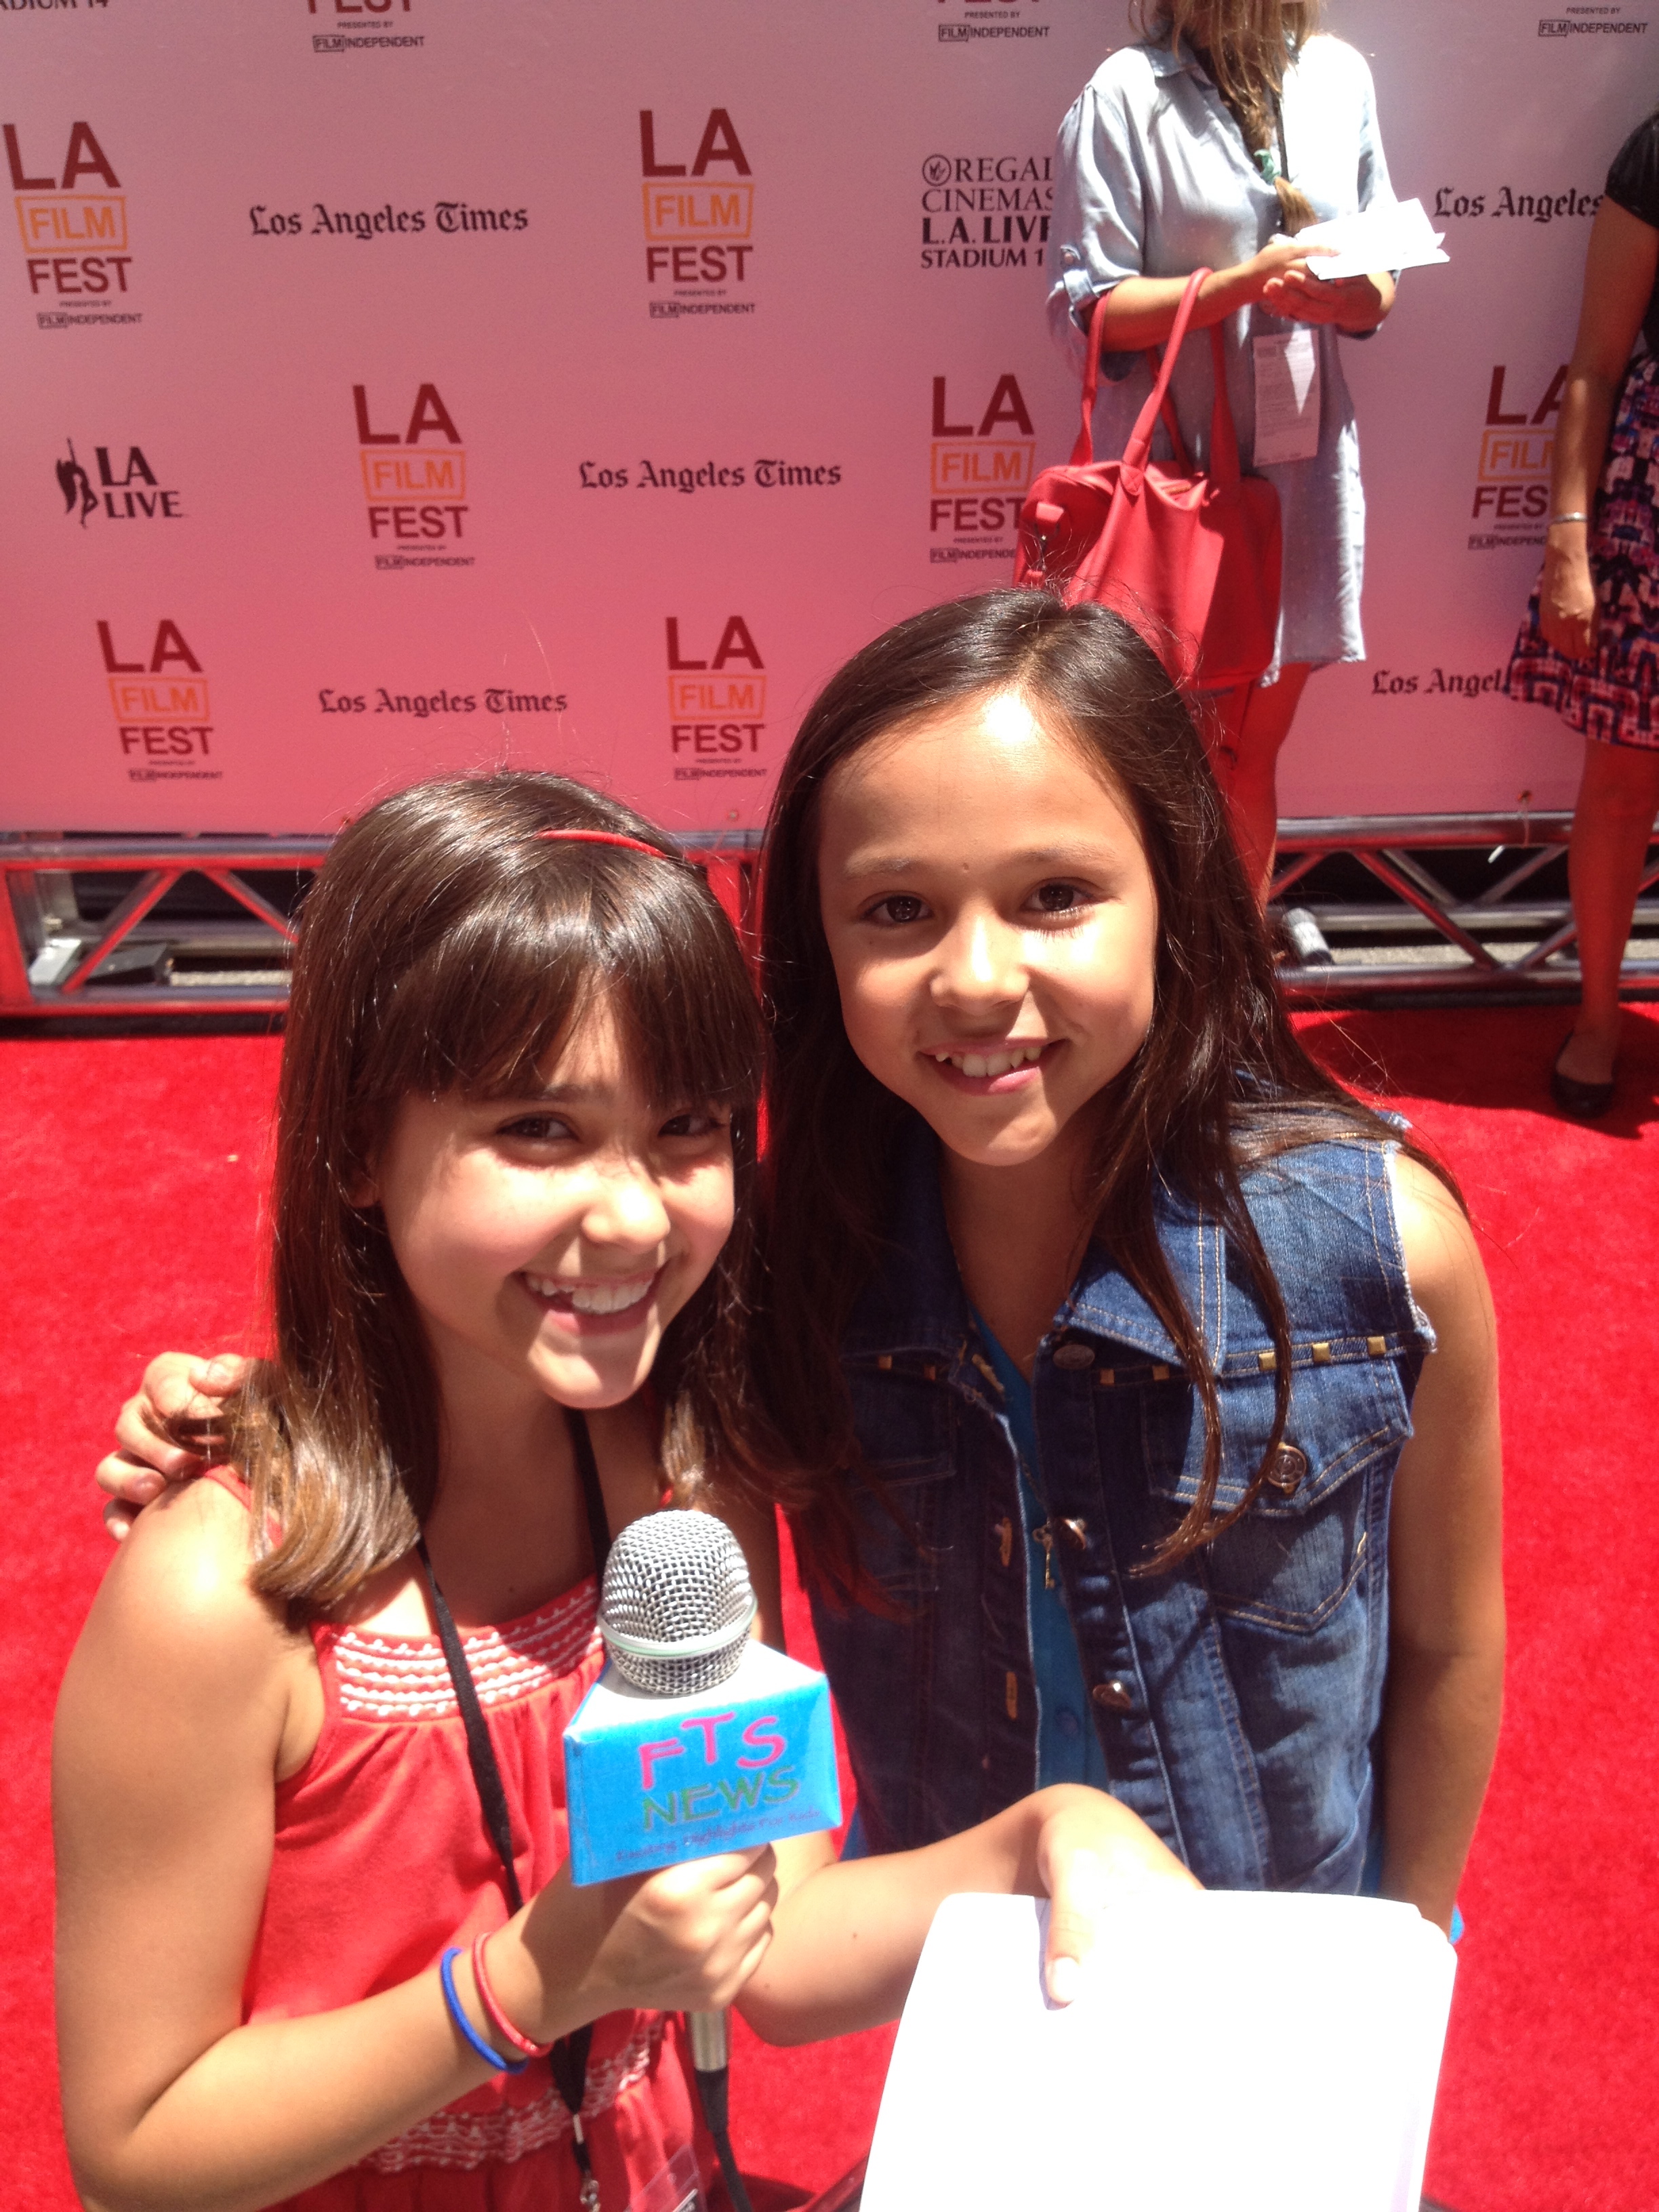 Molly Jackson and Breanna Yde at the 